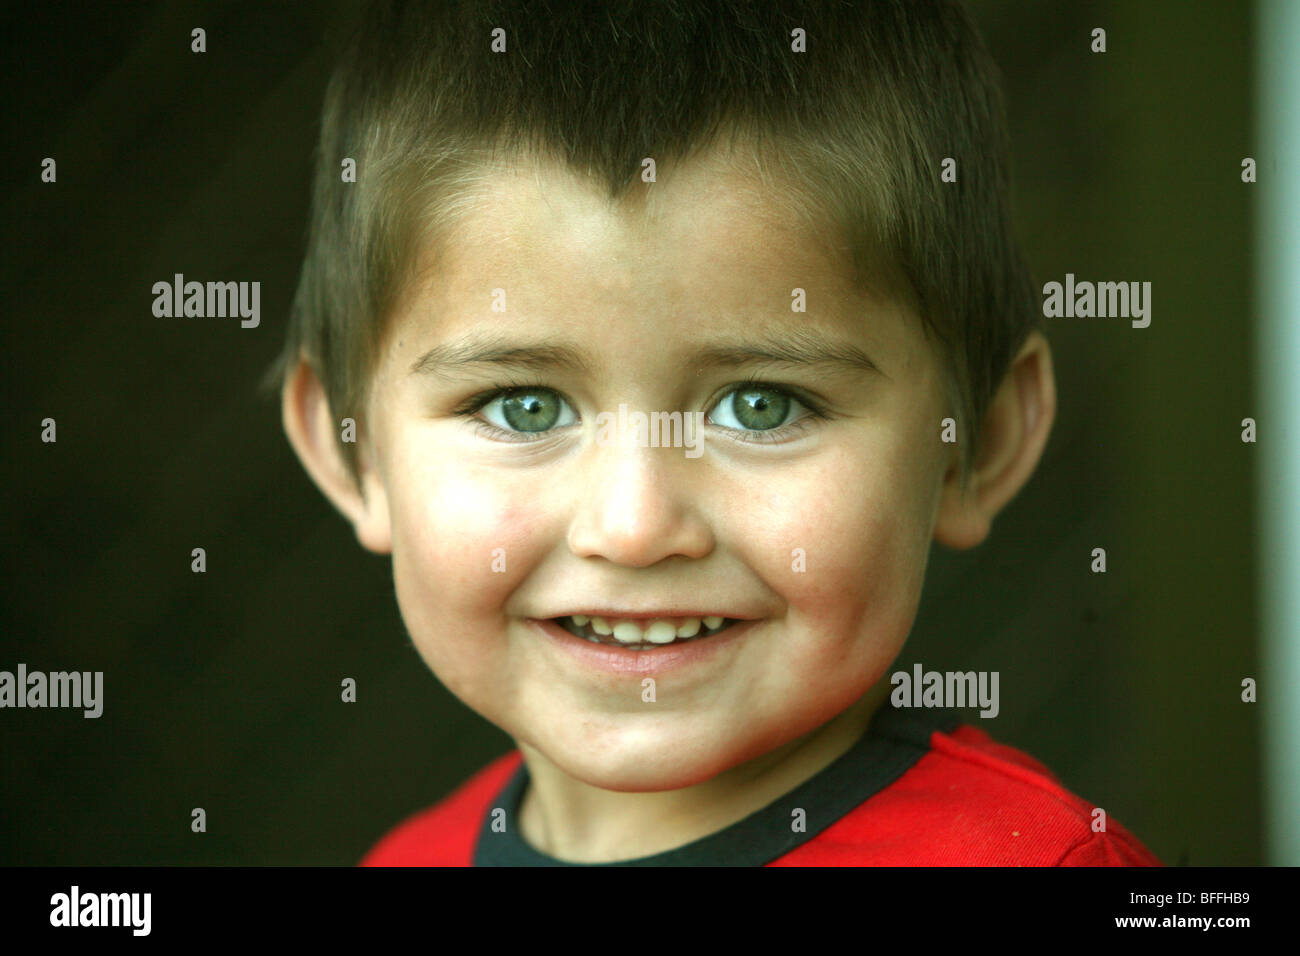 Portrait of boy with dirty face Stock Photo